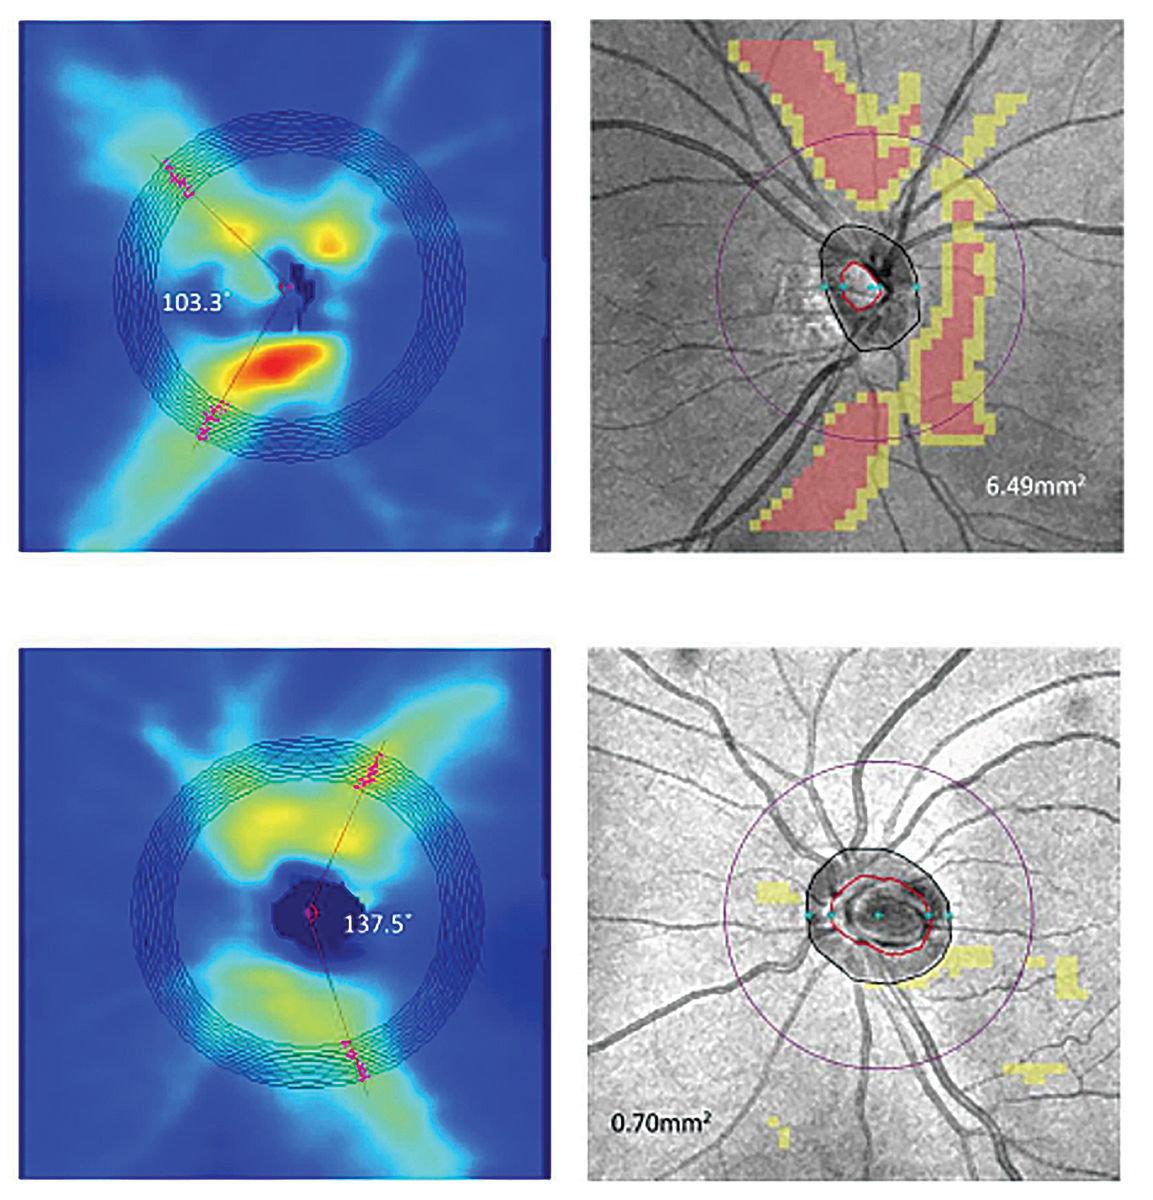 RNFL thickness (left) and deviation maps (right) show the increased vulnerability to glaucoma brought about by high myopia. The top images are a -6.75D myopia with an axial length of 27.26mm; at bottom is a -2.00D myopia with axial length of 26.61mm.